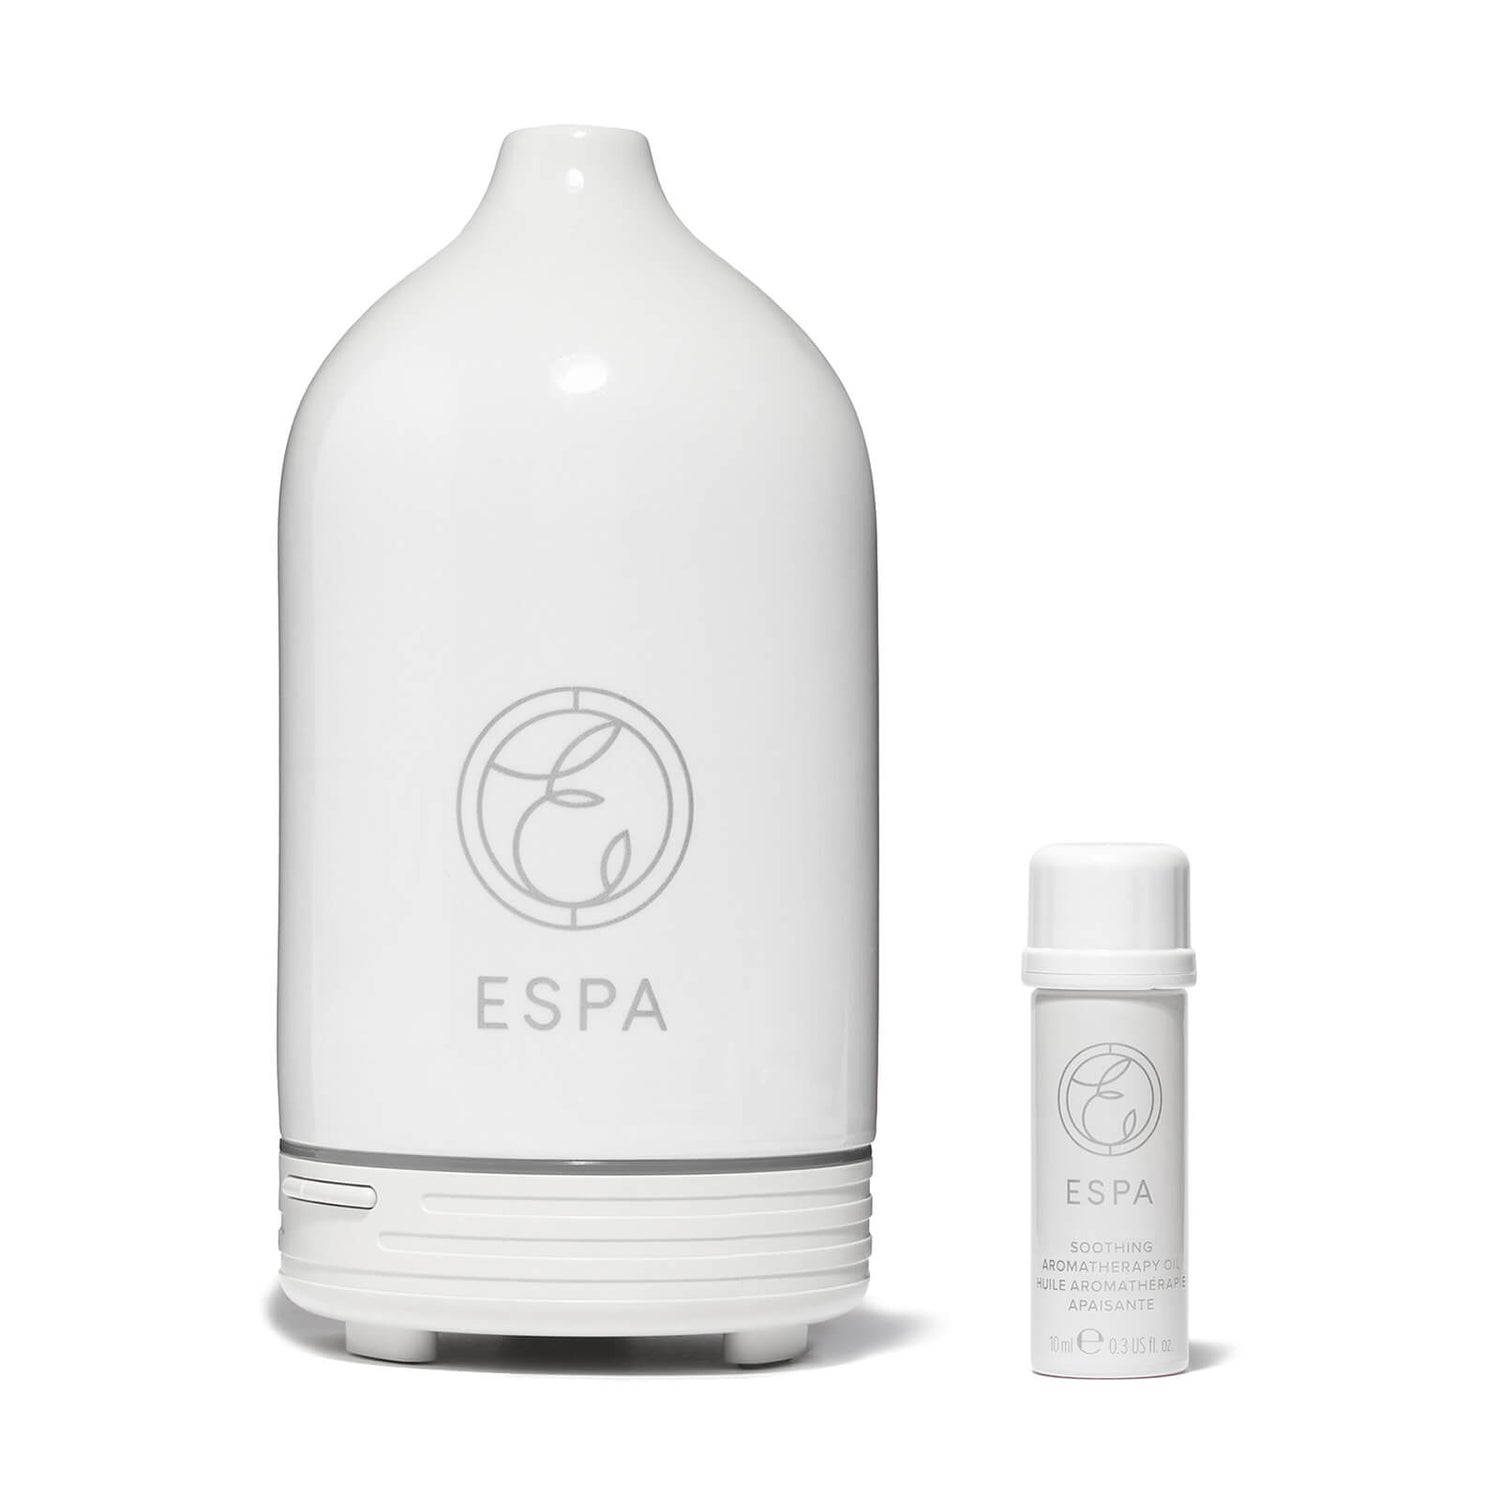 ESPA Aromatherapy Essential Oil Diffuser Starter Kit - Soothing (Worth £105.00)